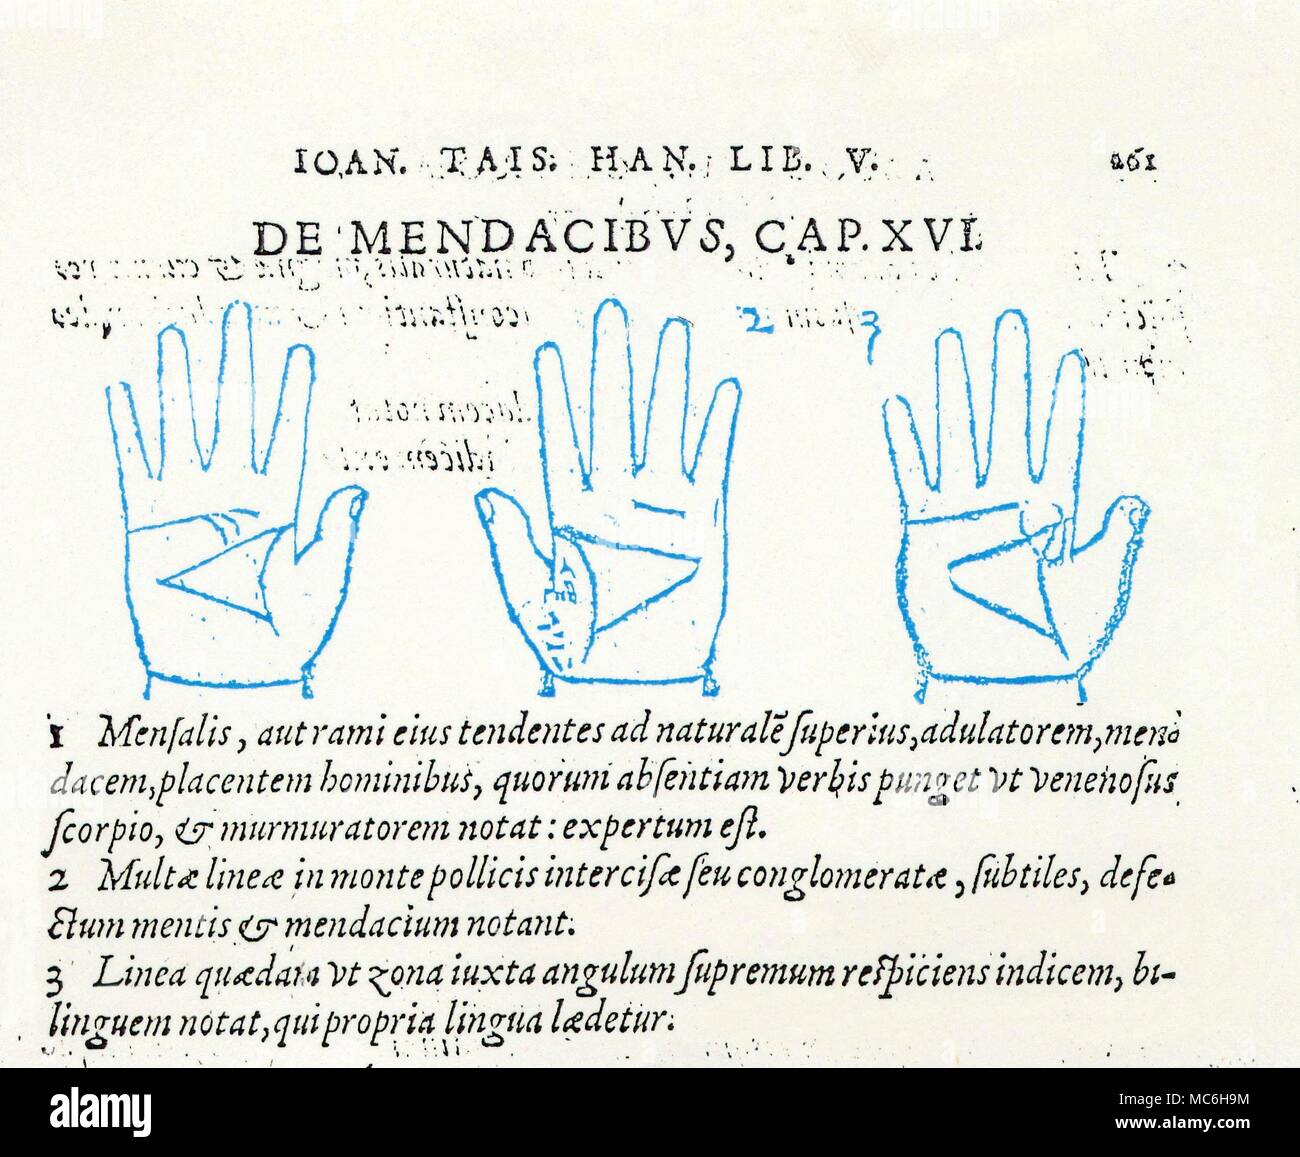 PALMISTRY Example of late mediaeval palmistry - three diagrams depicting the relationship of the three main lines in relation to mendacious people. From Johannes Taisniers, Absolutissimae Chyromantiae, 1632. [Left diagram] When the Heart line (formerly called the Mensal) ends in rays that pour towards the Head line, this is taken as a sign of mendacity, and of one who will end to commit adultery. [Middle diagram] When here are a number of small lines on the ball of the thumb (Mount of Venus), this is a sign of a defective mentality, and of mendacity. [Right diagram] a curious line curv Stock Photo